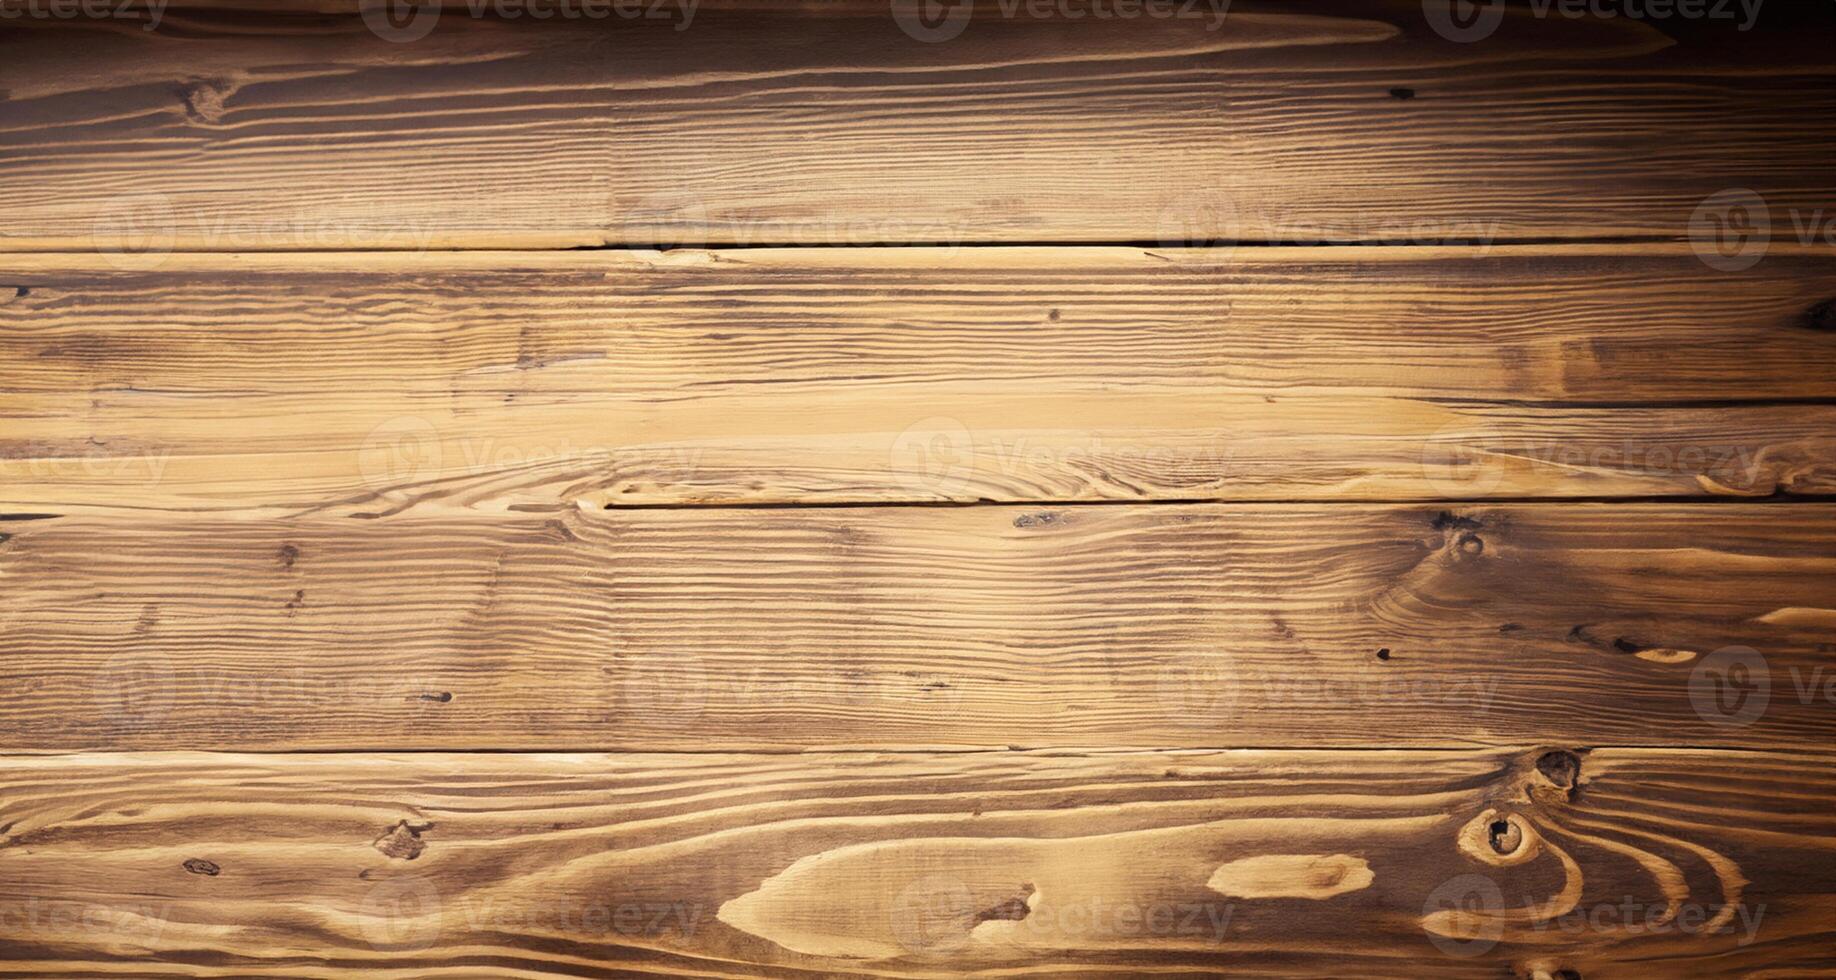 Vintage Wooden Plank Background, Rustic Texture for Design. photo